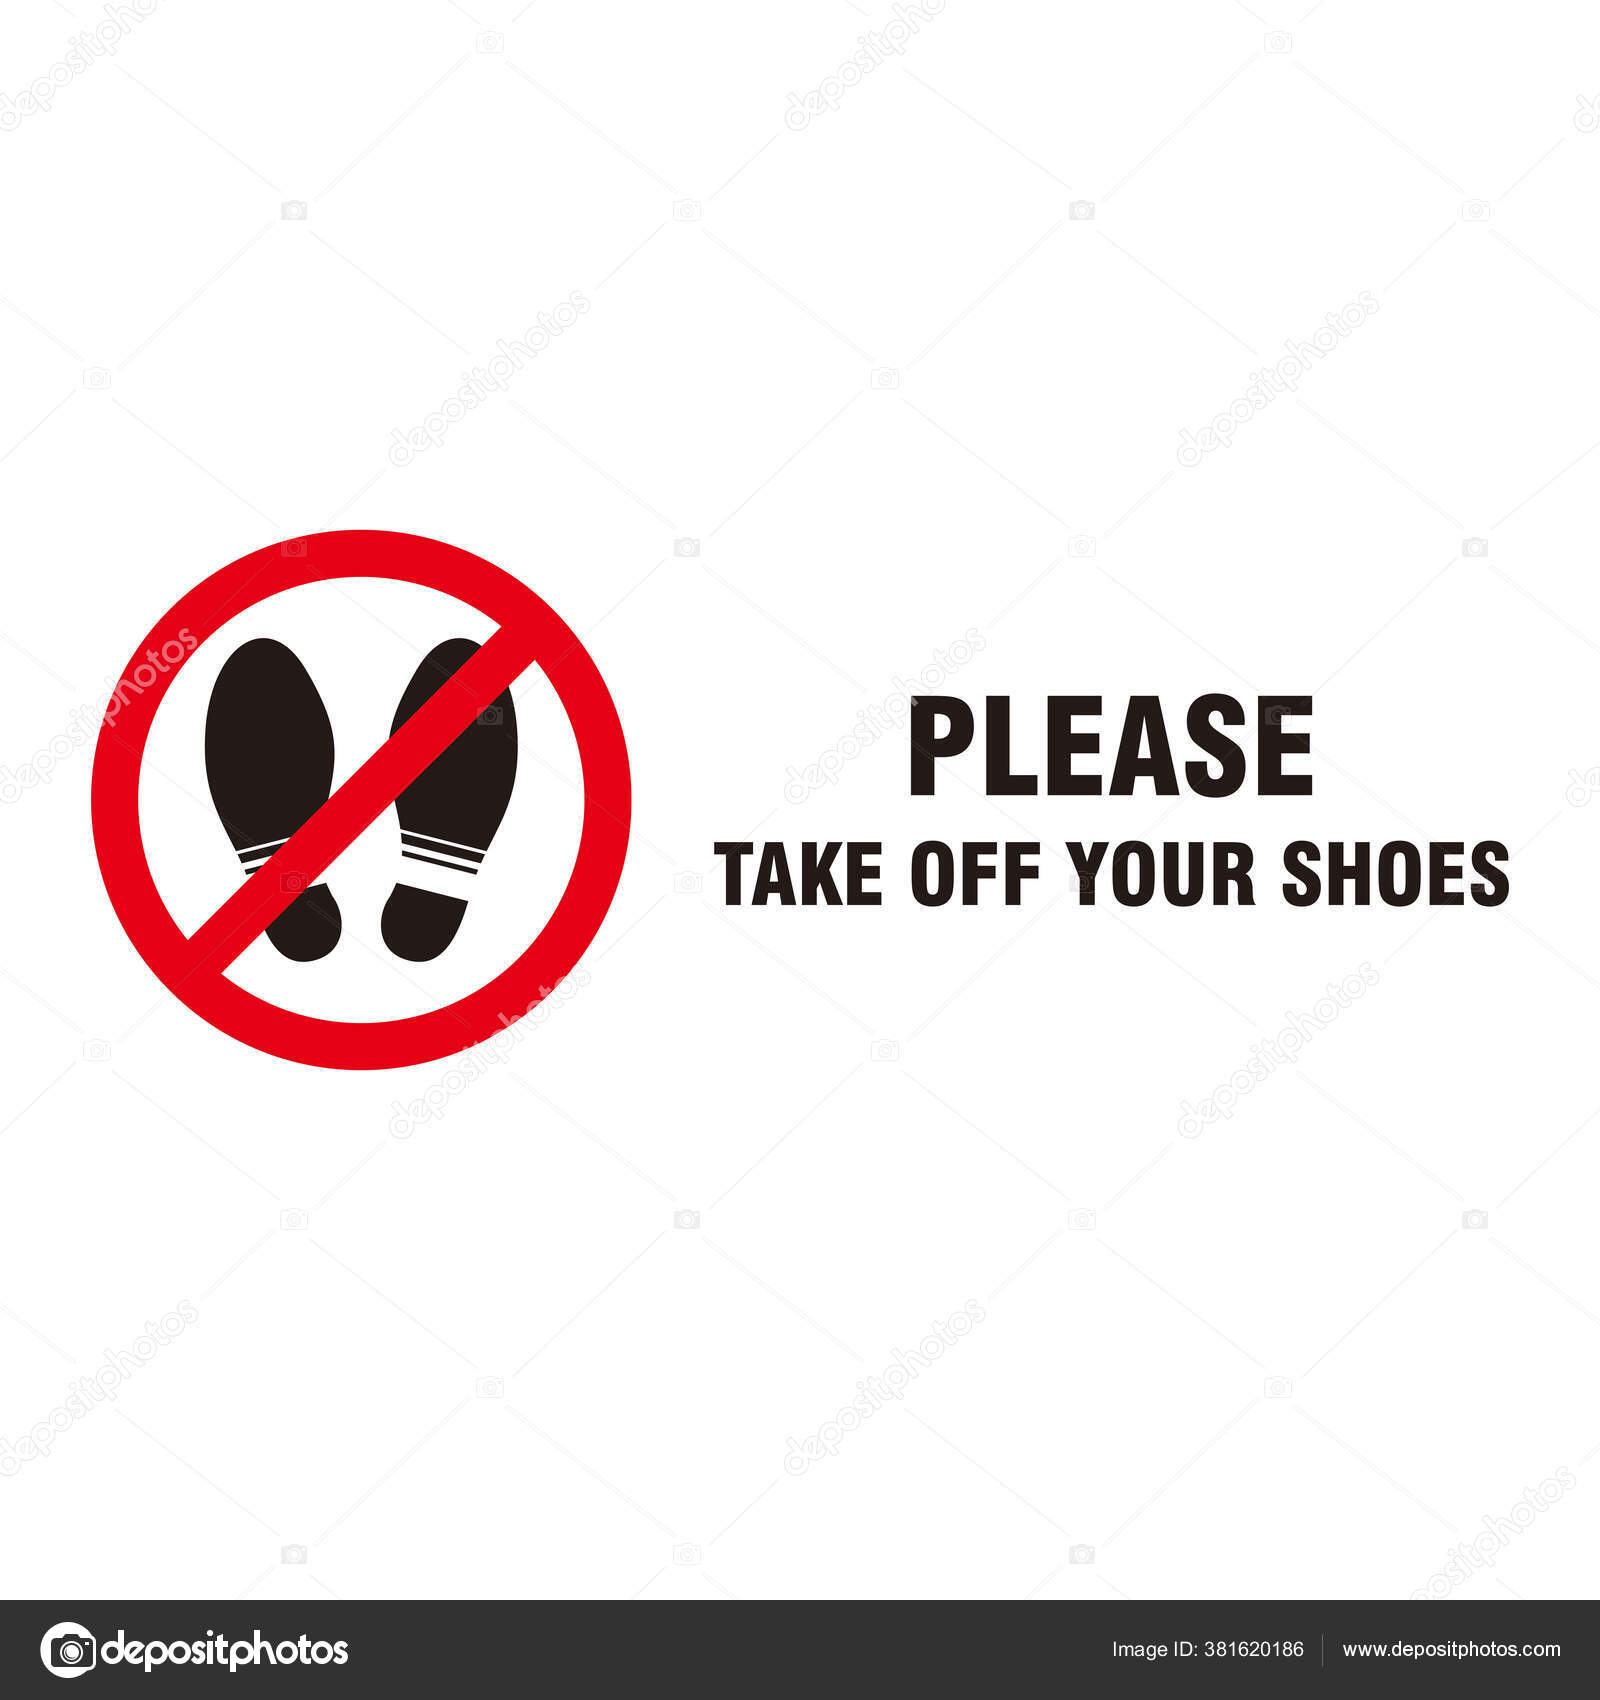 Remove Your Shoes Sign Board Template | PosterMyWall